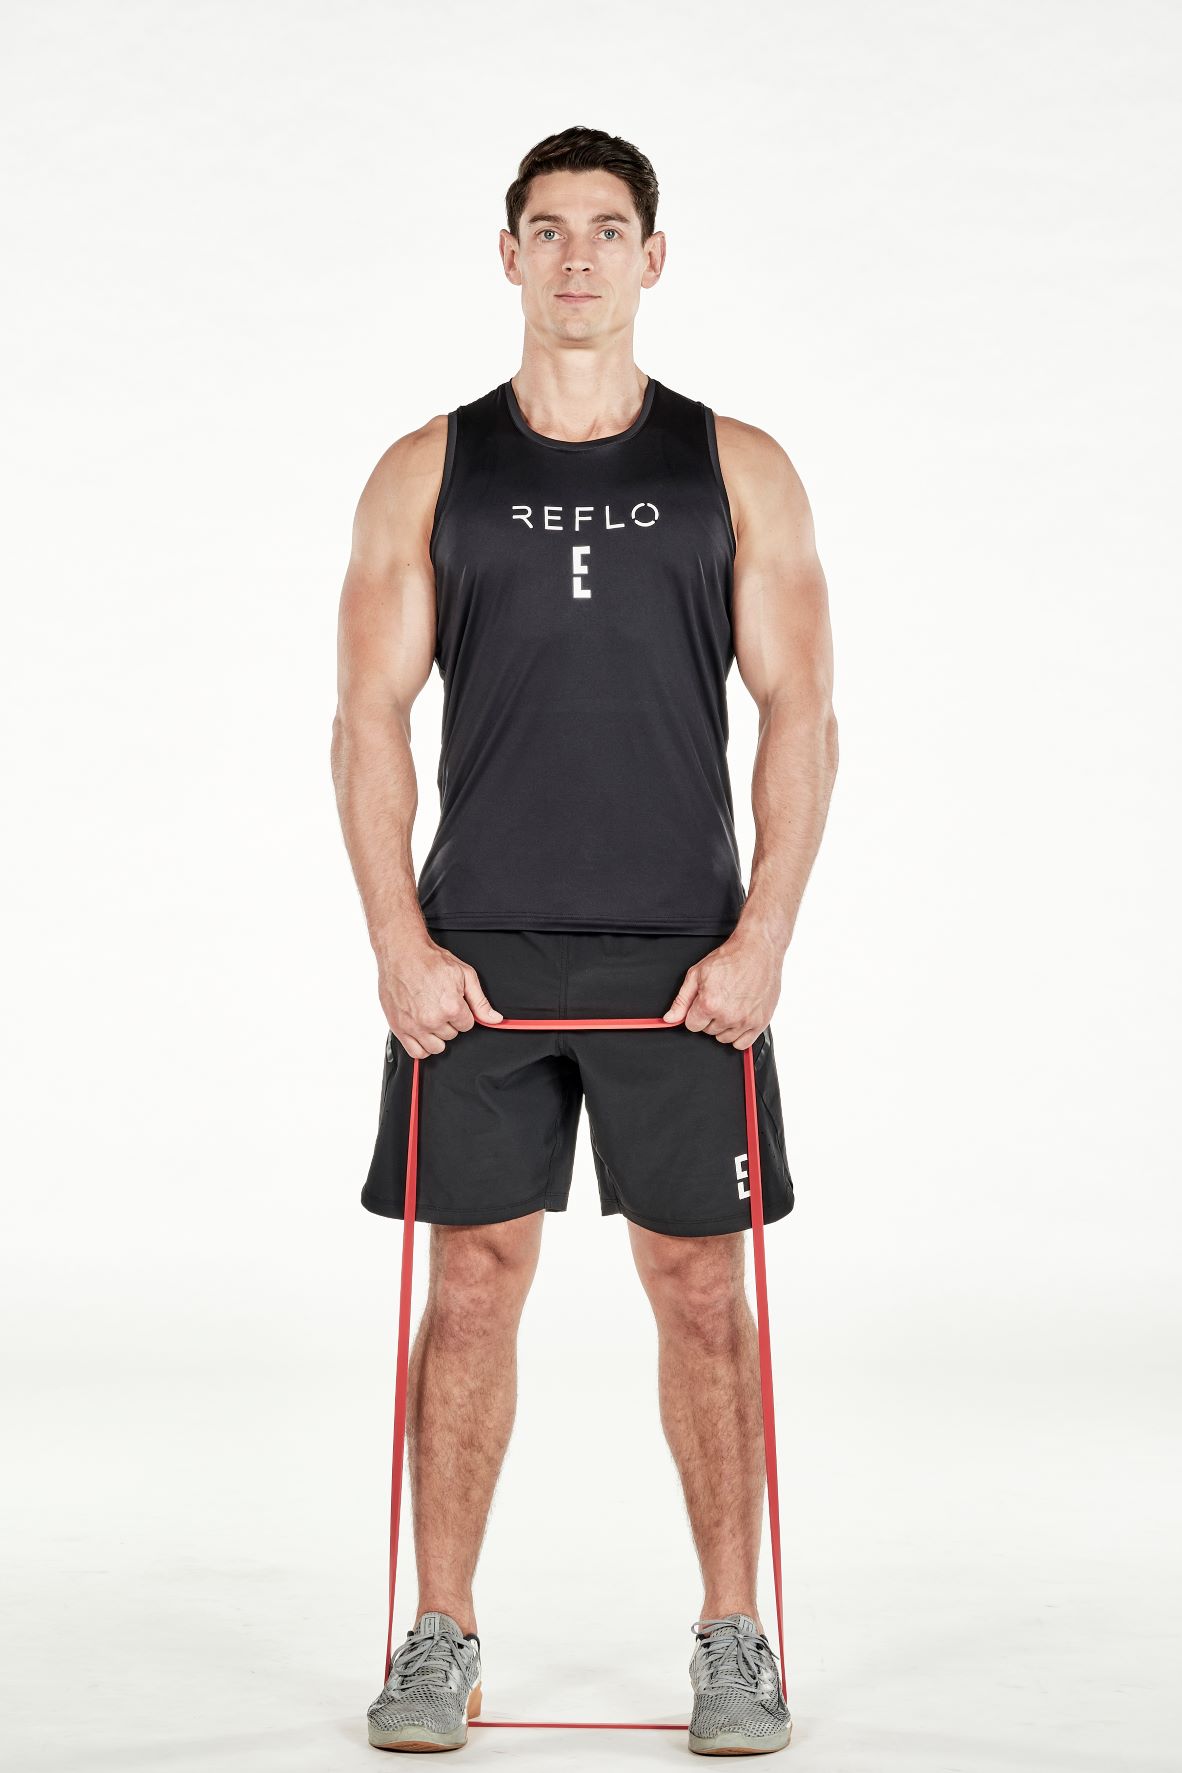 man demonstrating step one of upright row; he stands upright, both hands holding a resistance band that is secured under his feet; he wears a black fitness vest, black shorts and trainers